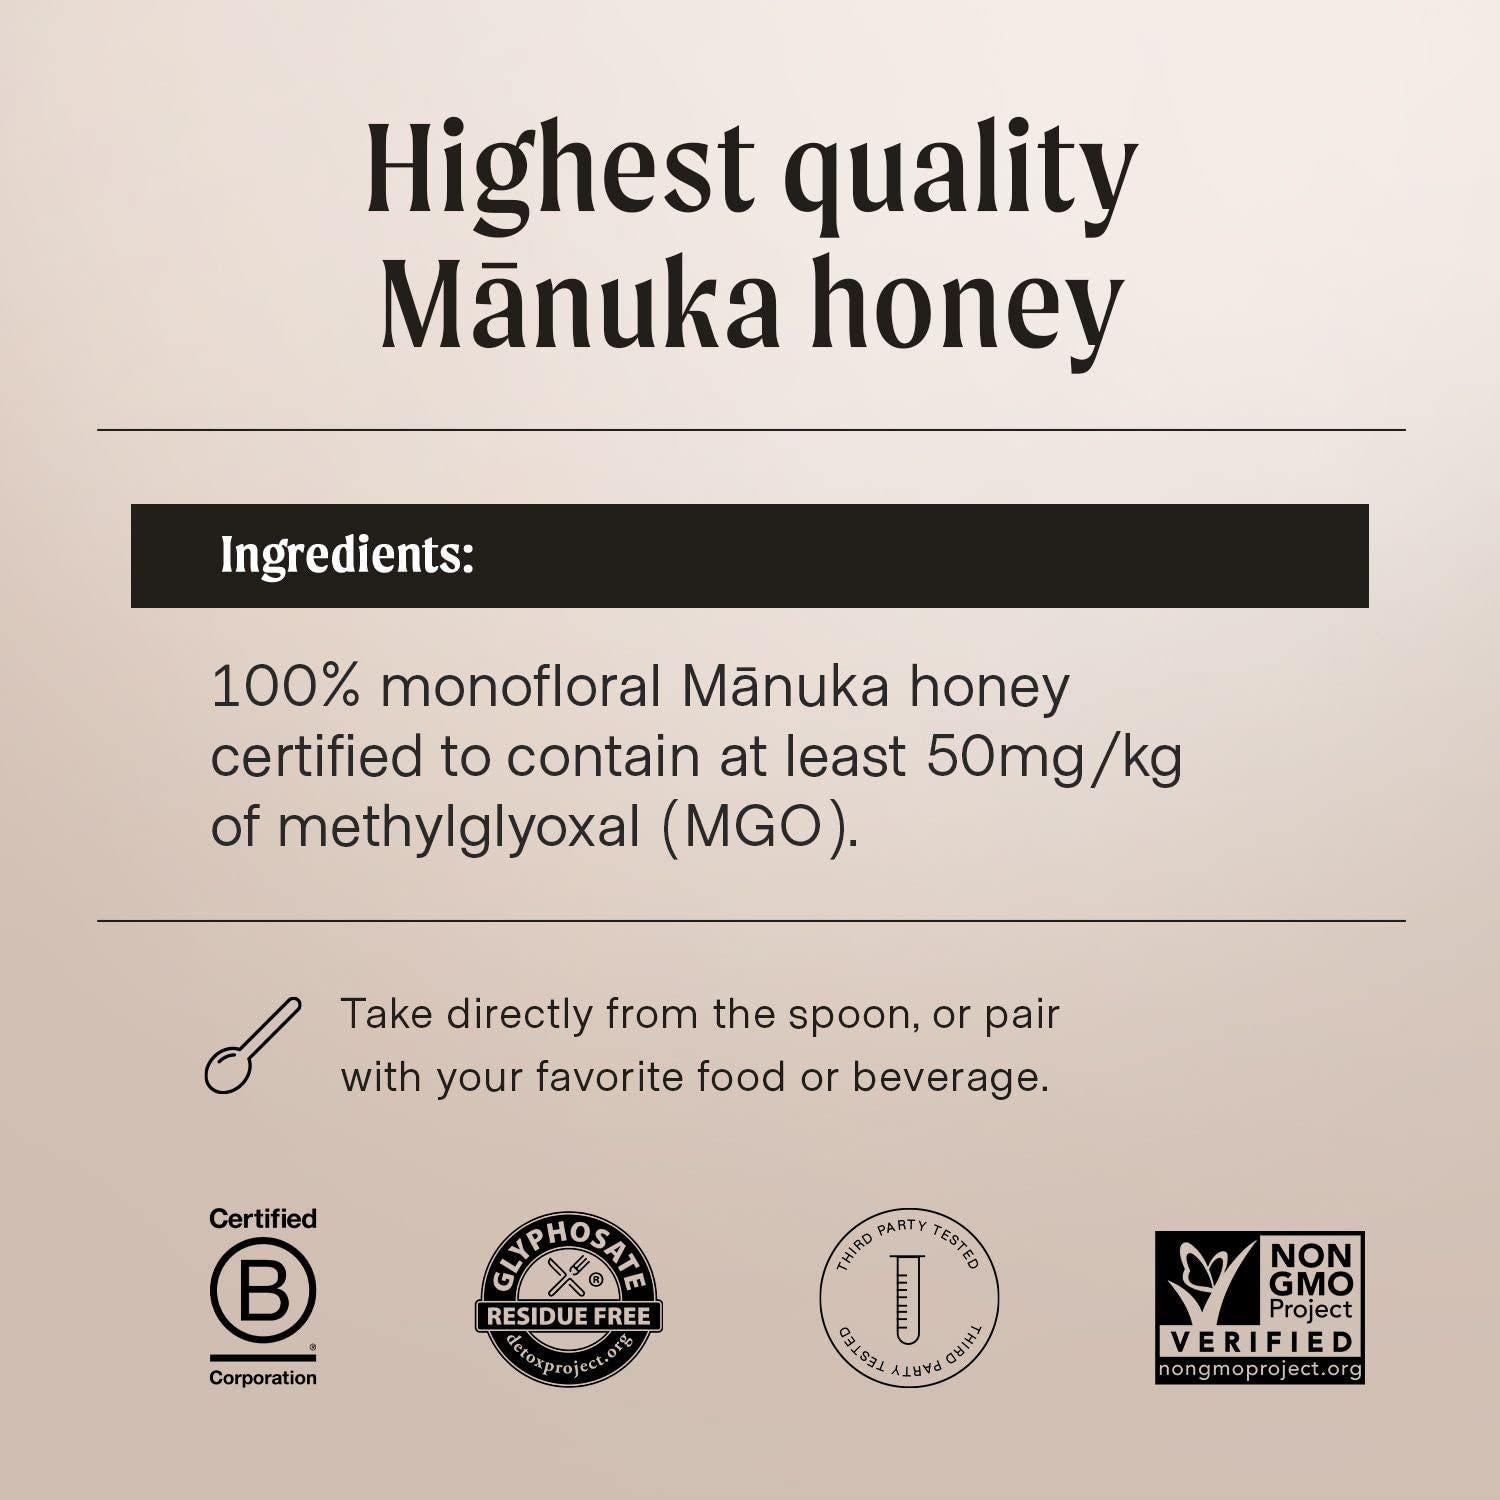 Wedderspoon Raw Premium Manuka Honey, KFactor 16, 17.6 Oz, Unpasteurized,  Genuine New Zealand Honey, Traceable from Our Hives to Your Home